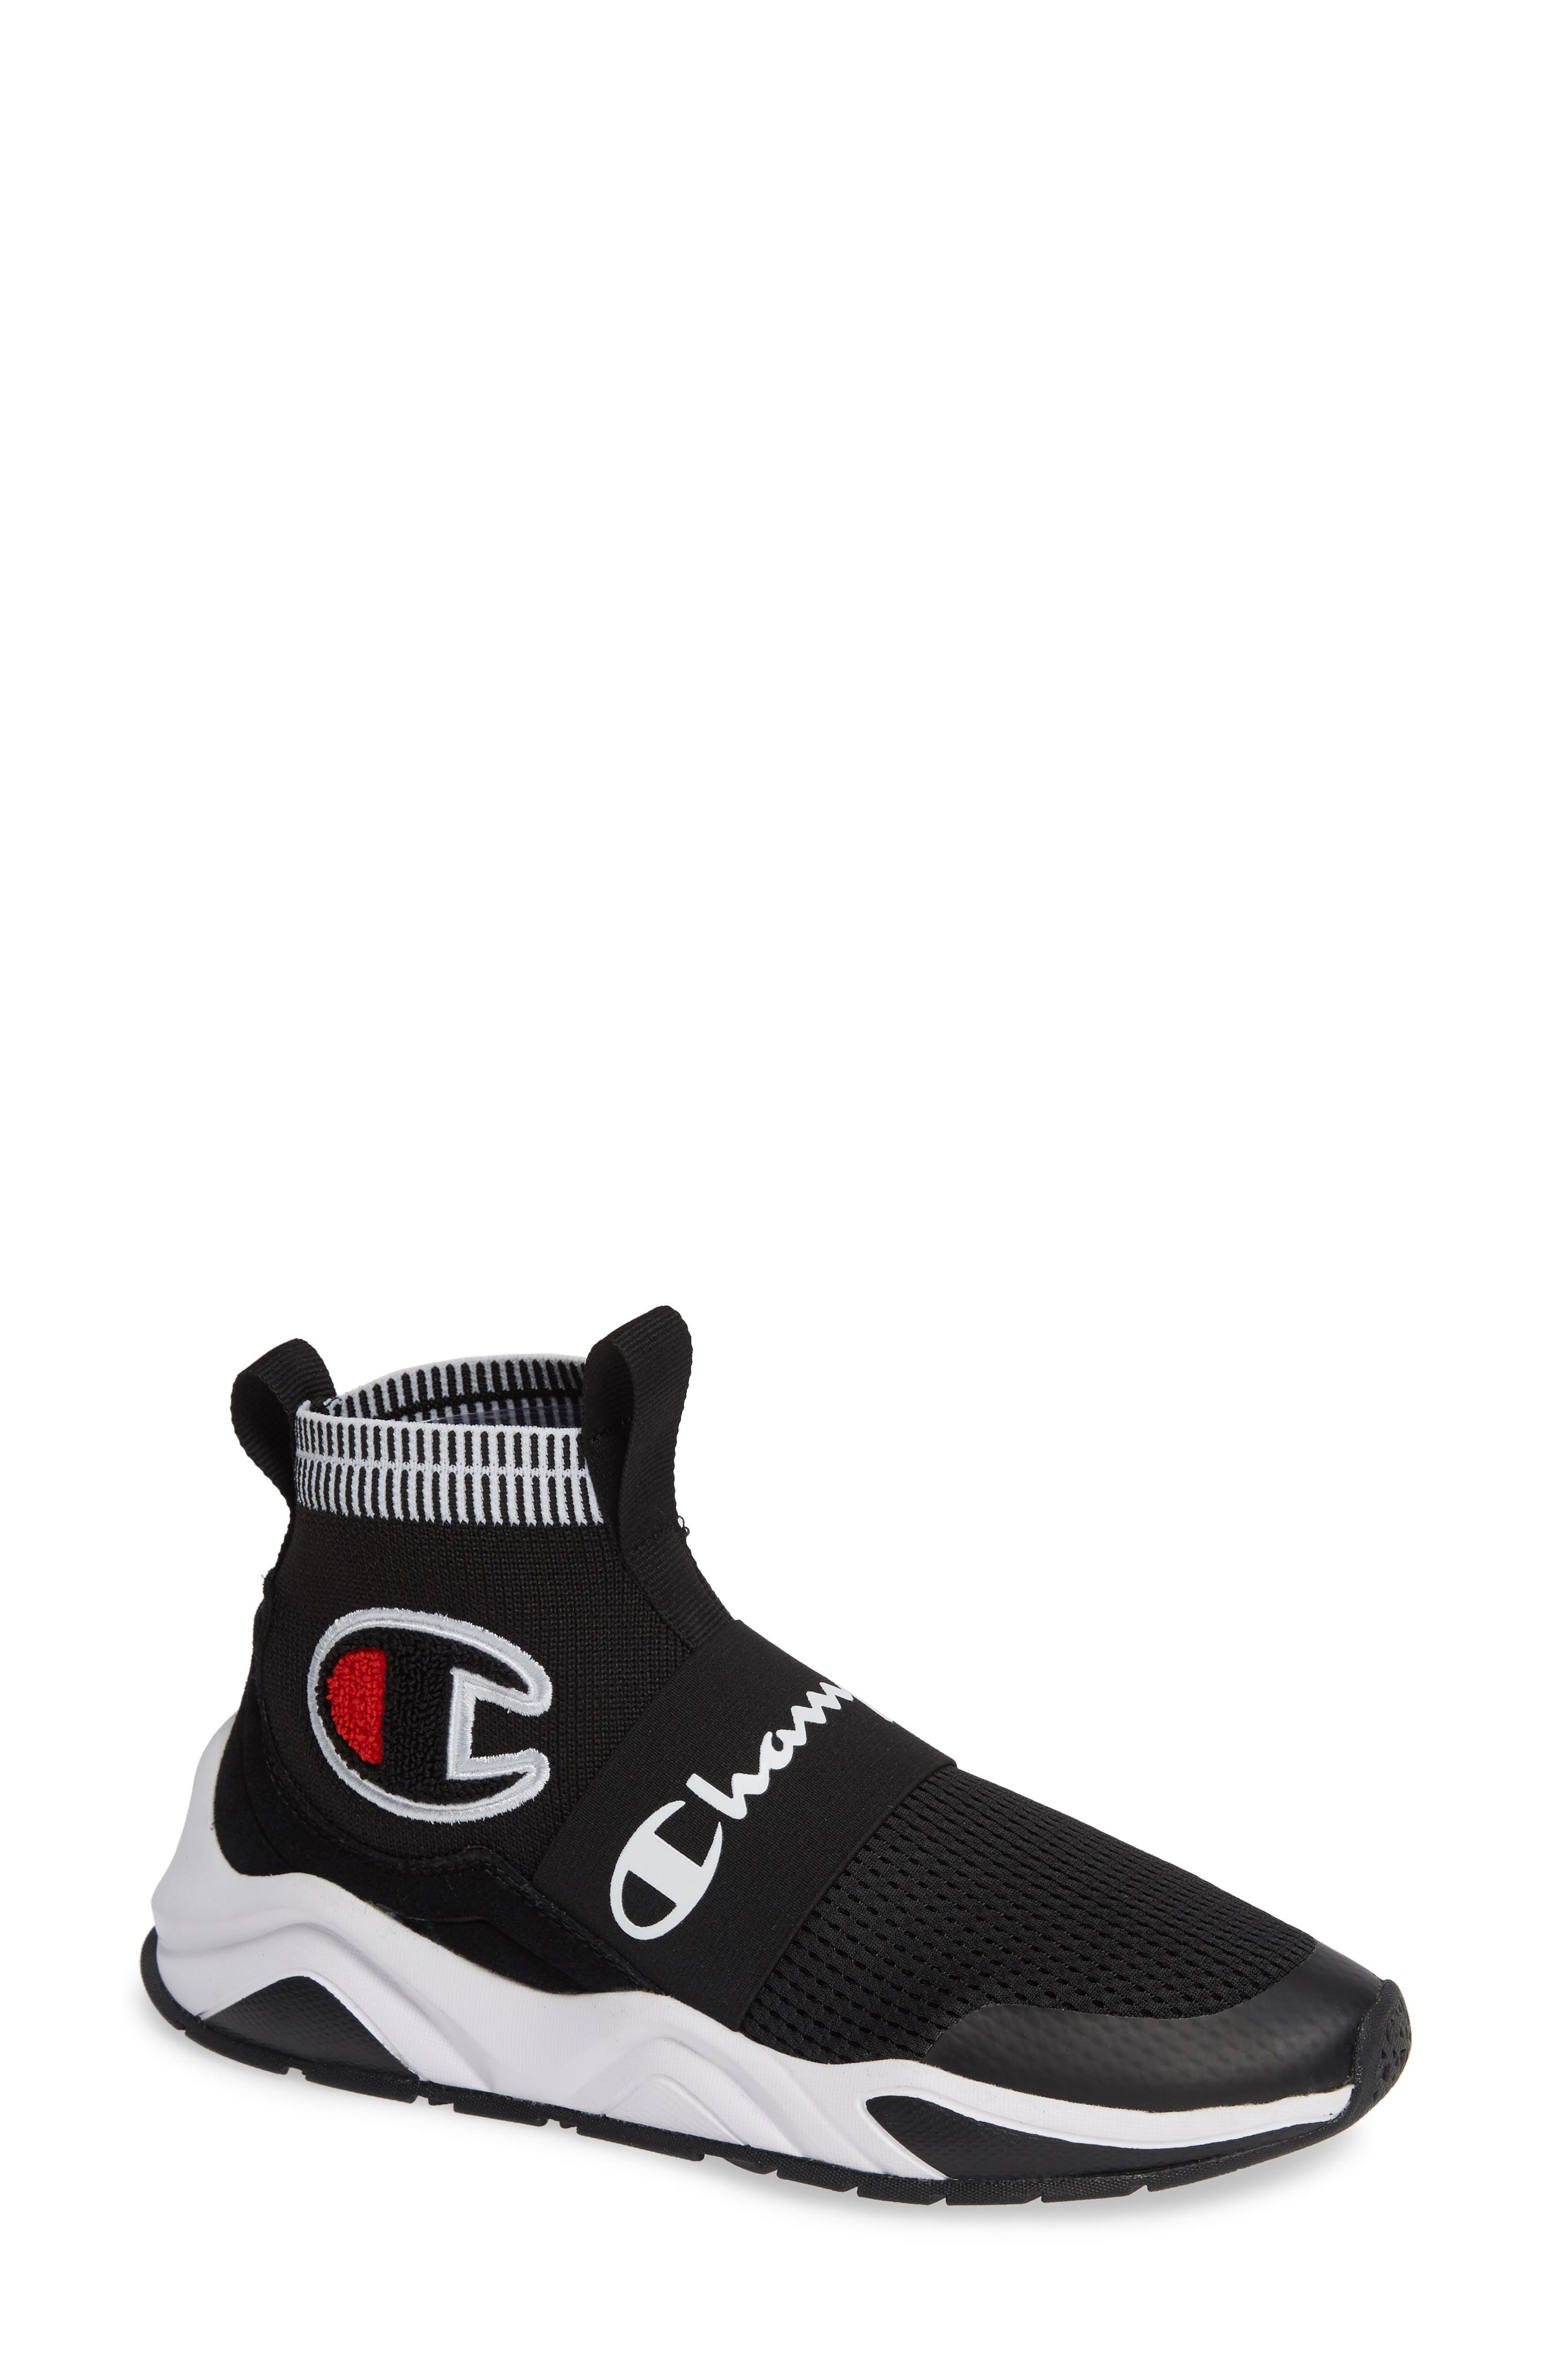 champion shoes that look like 